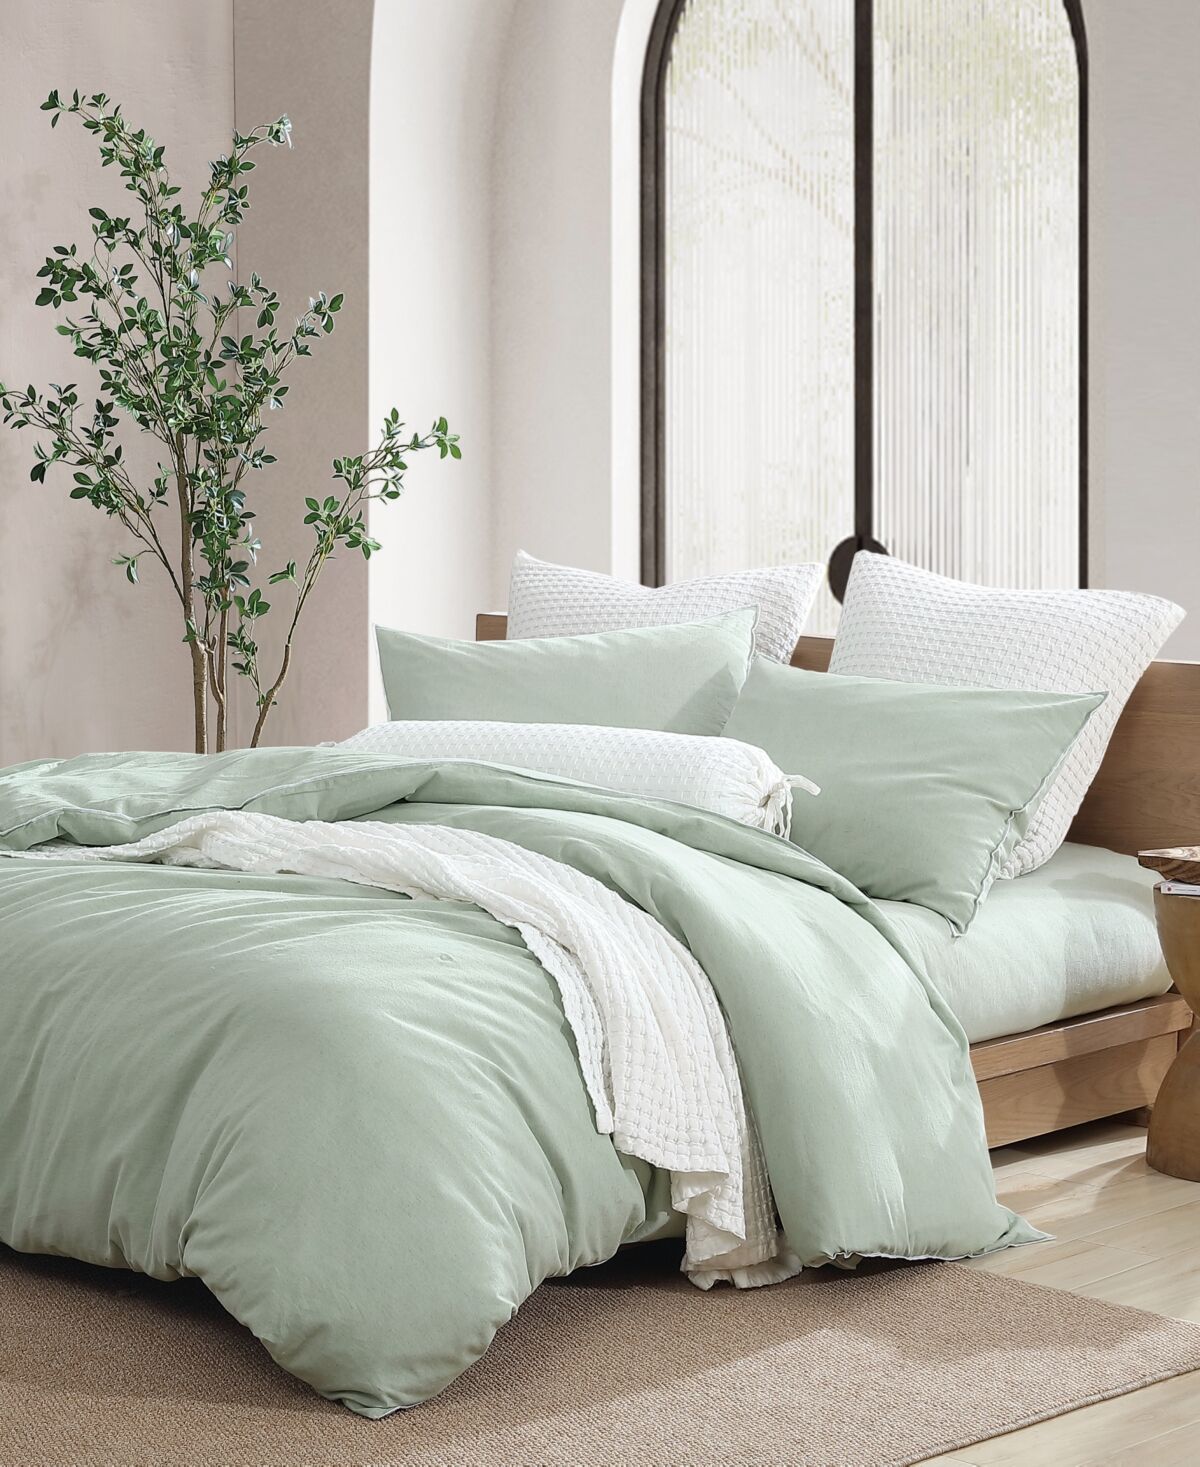 Dkny Pure Washed Linen 3-Piece Duvet Cover Set, Full/Queen - Sage